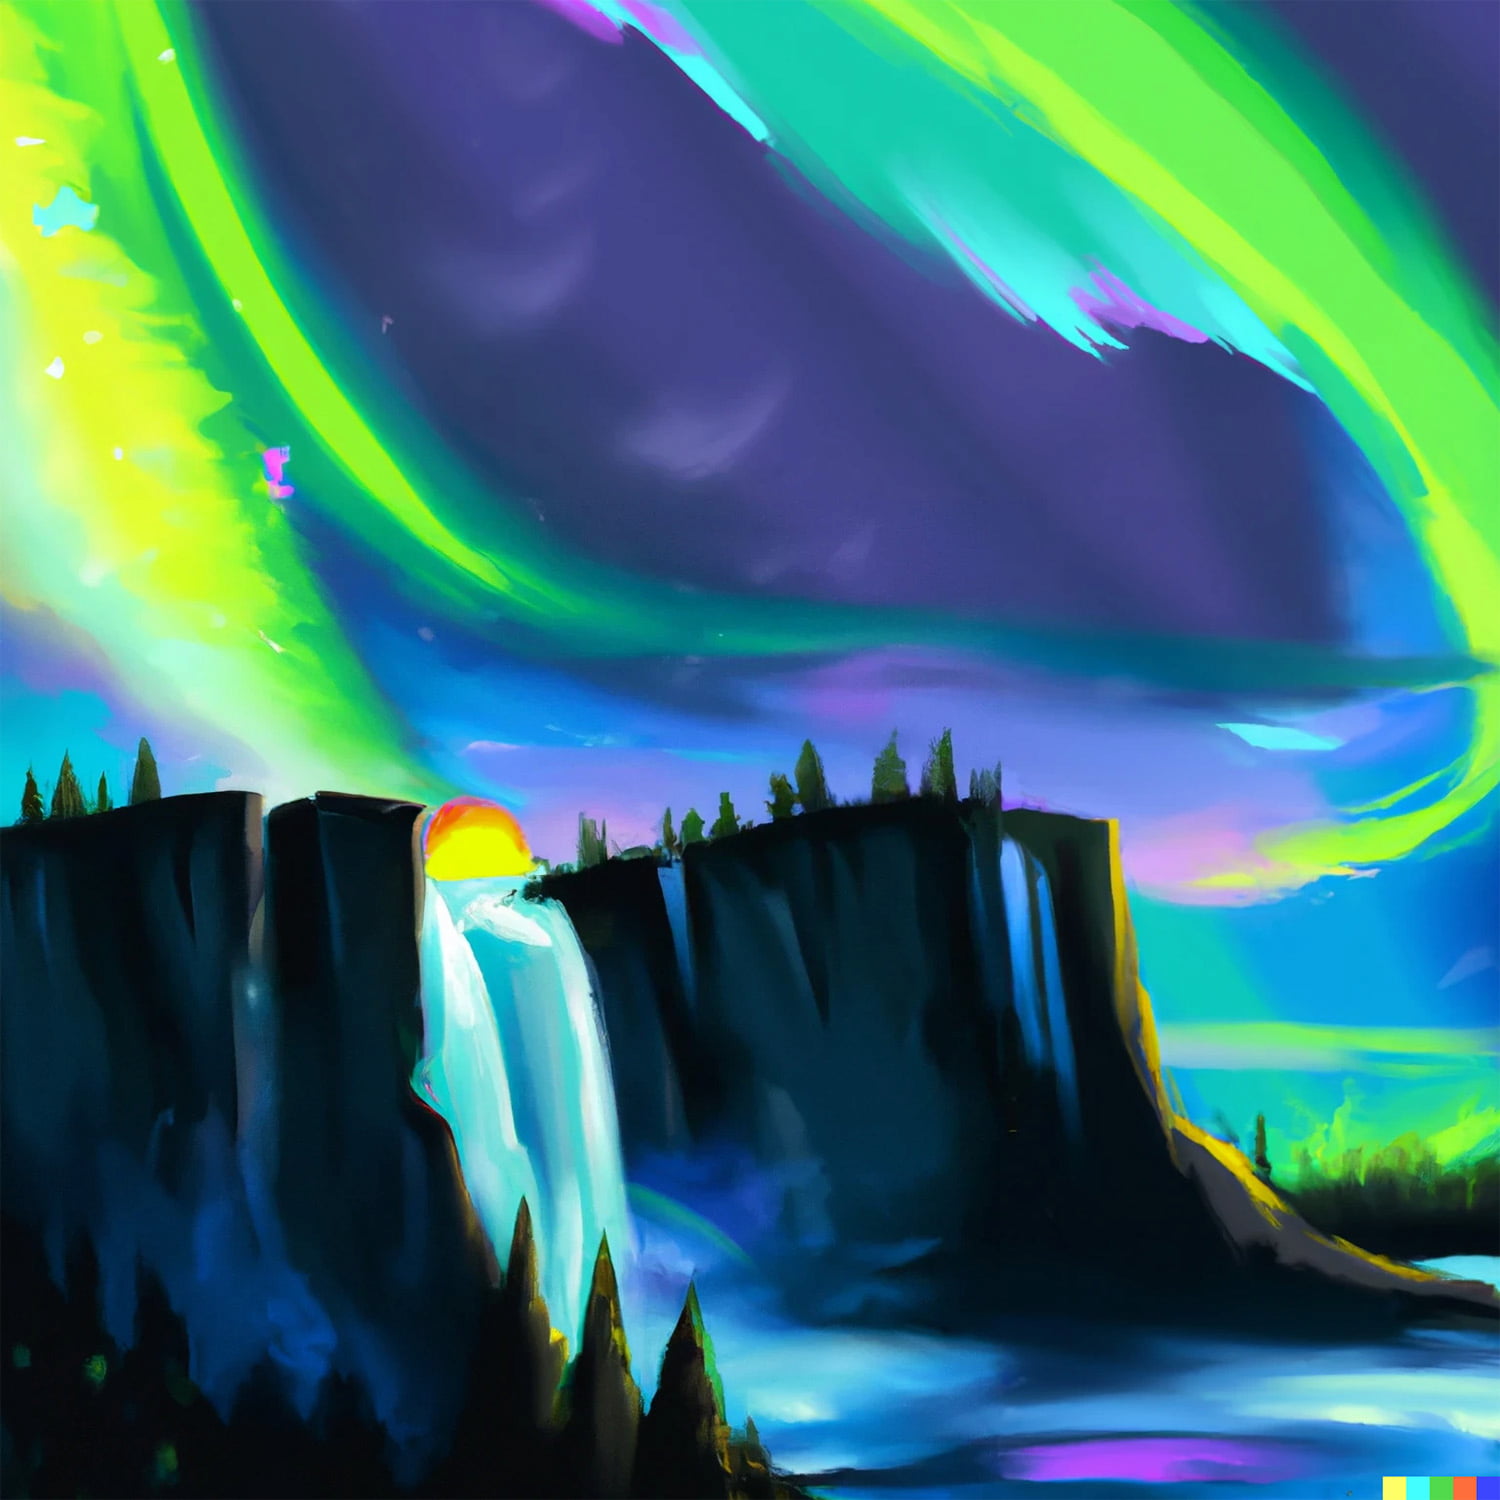 A horizontally cropped image. The image is a digital landscape illustration. A waterfall cascades down the face of a fir clad cliff.
The scene is lit up by green northern lights. Above the waterfall an orb is glowing in the color of the sun.